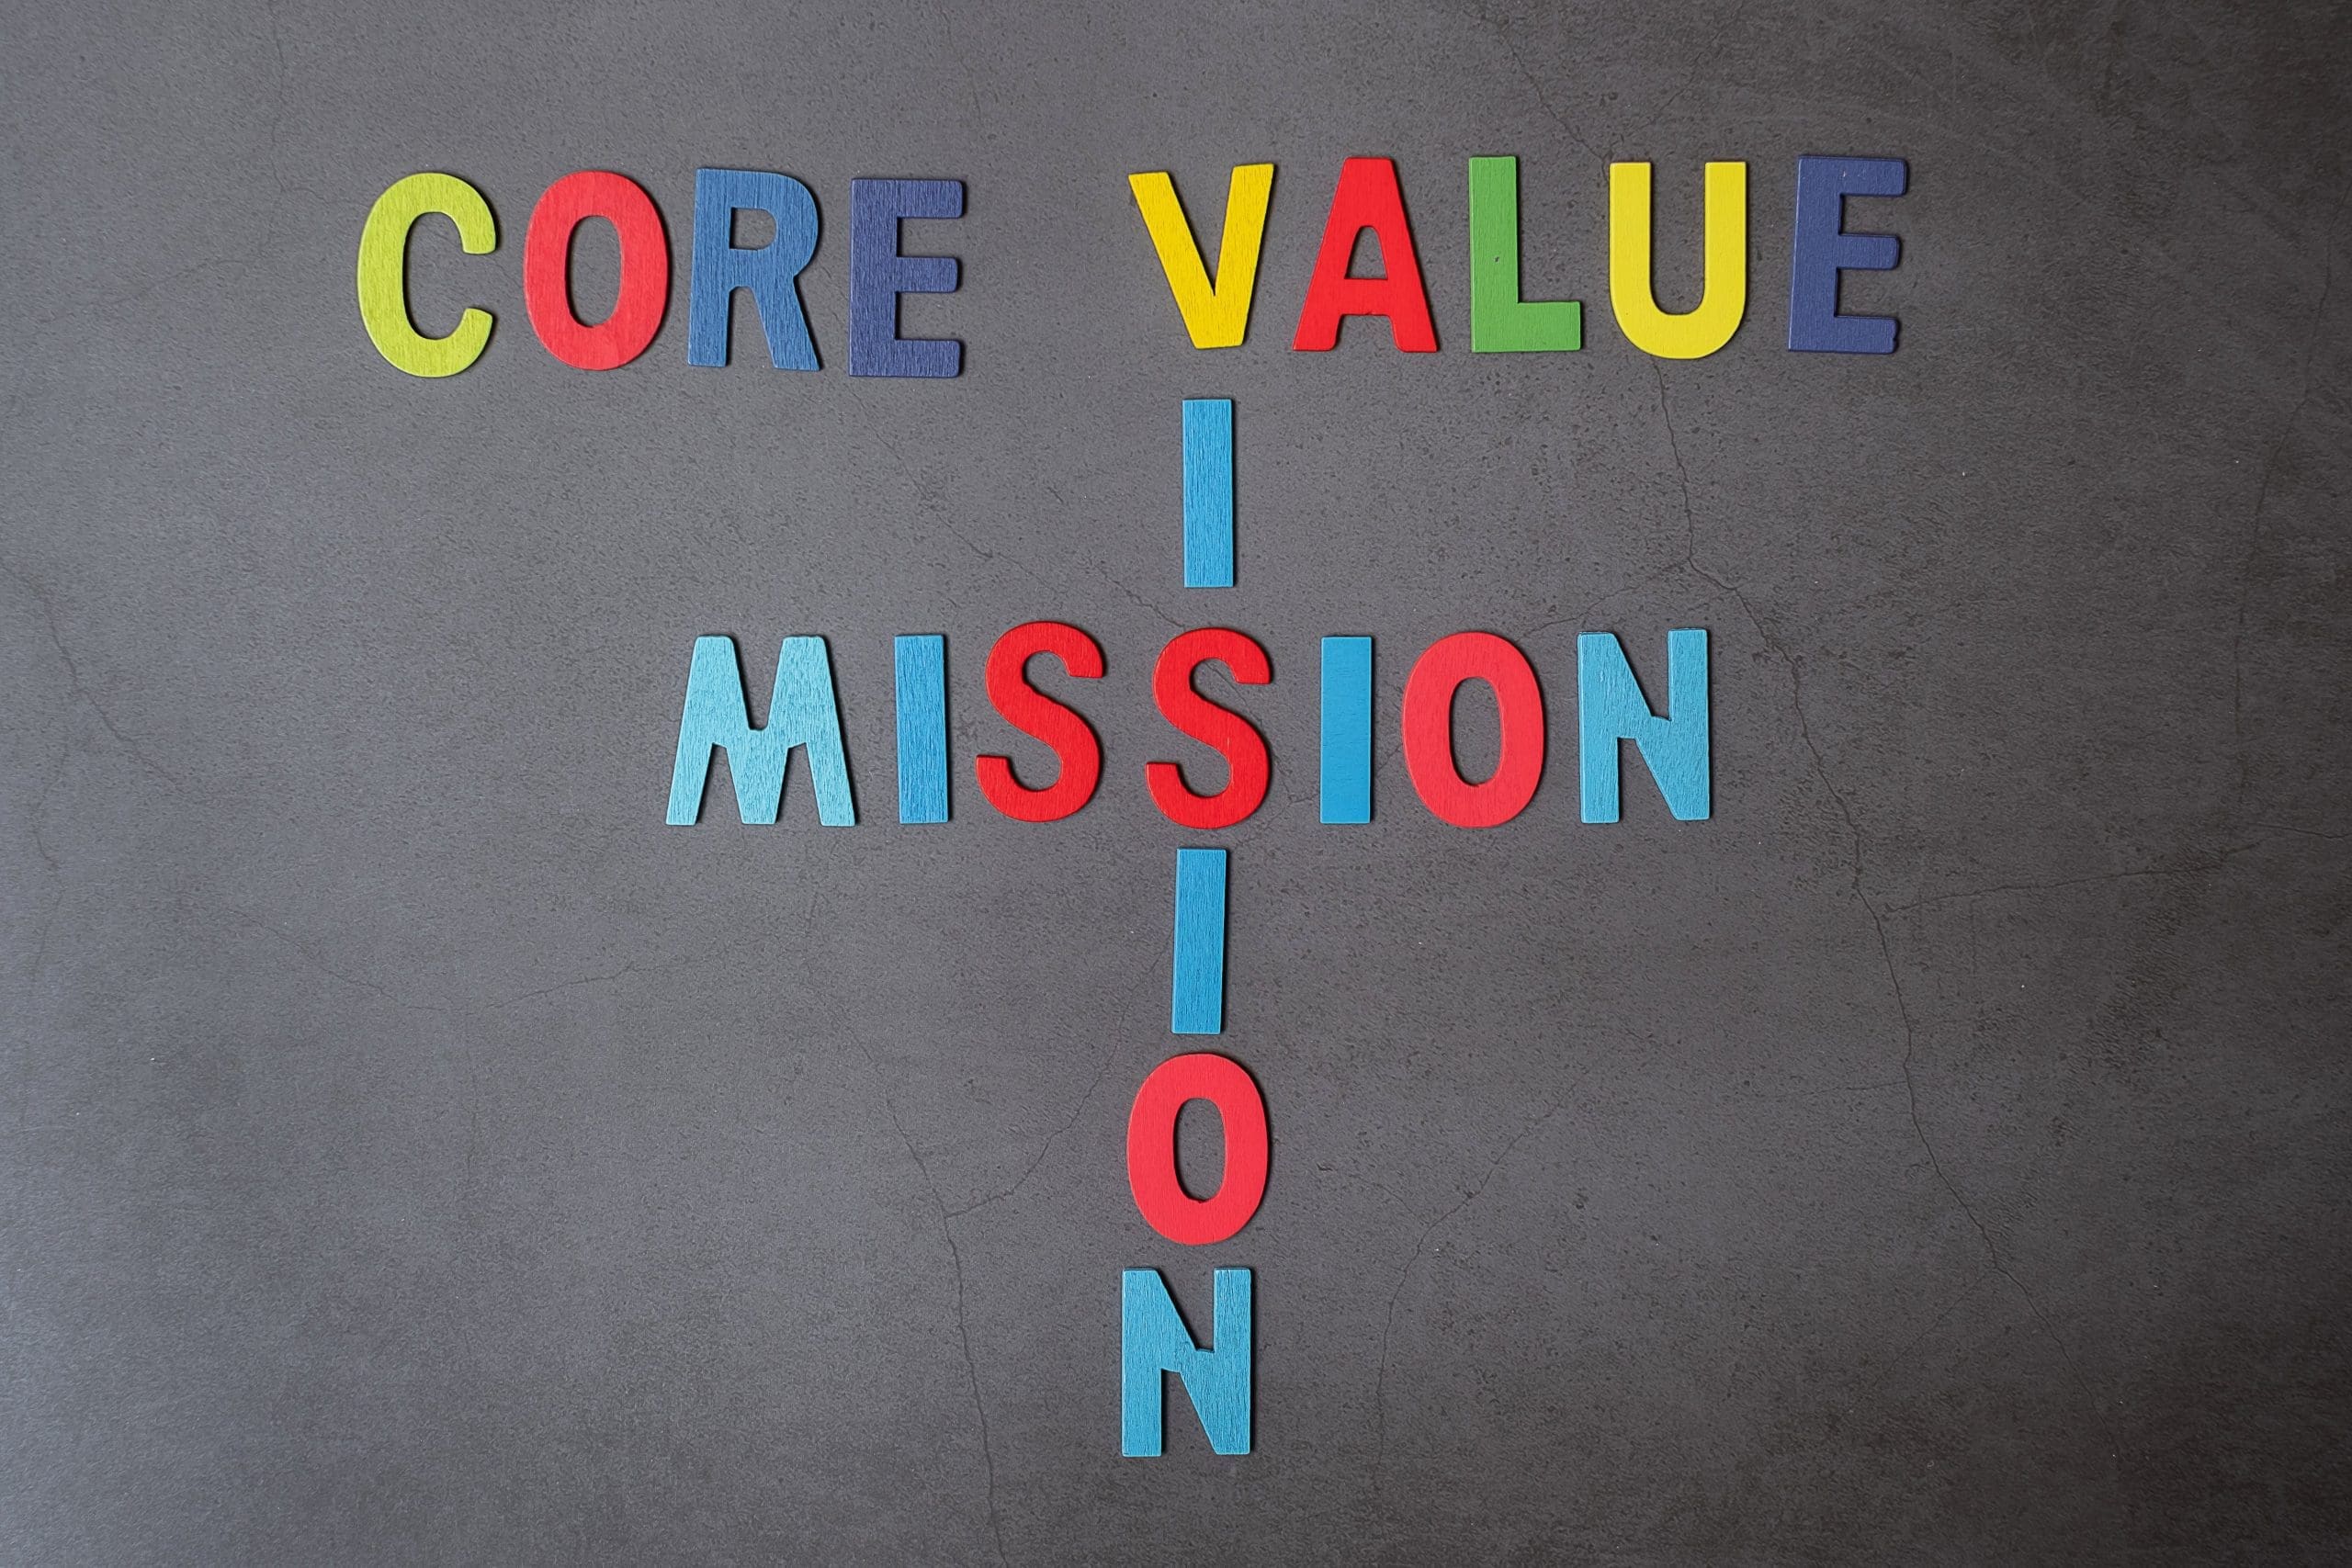 Colorful alphabet of MISSION, VISION and CORE VALUE concepts